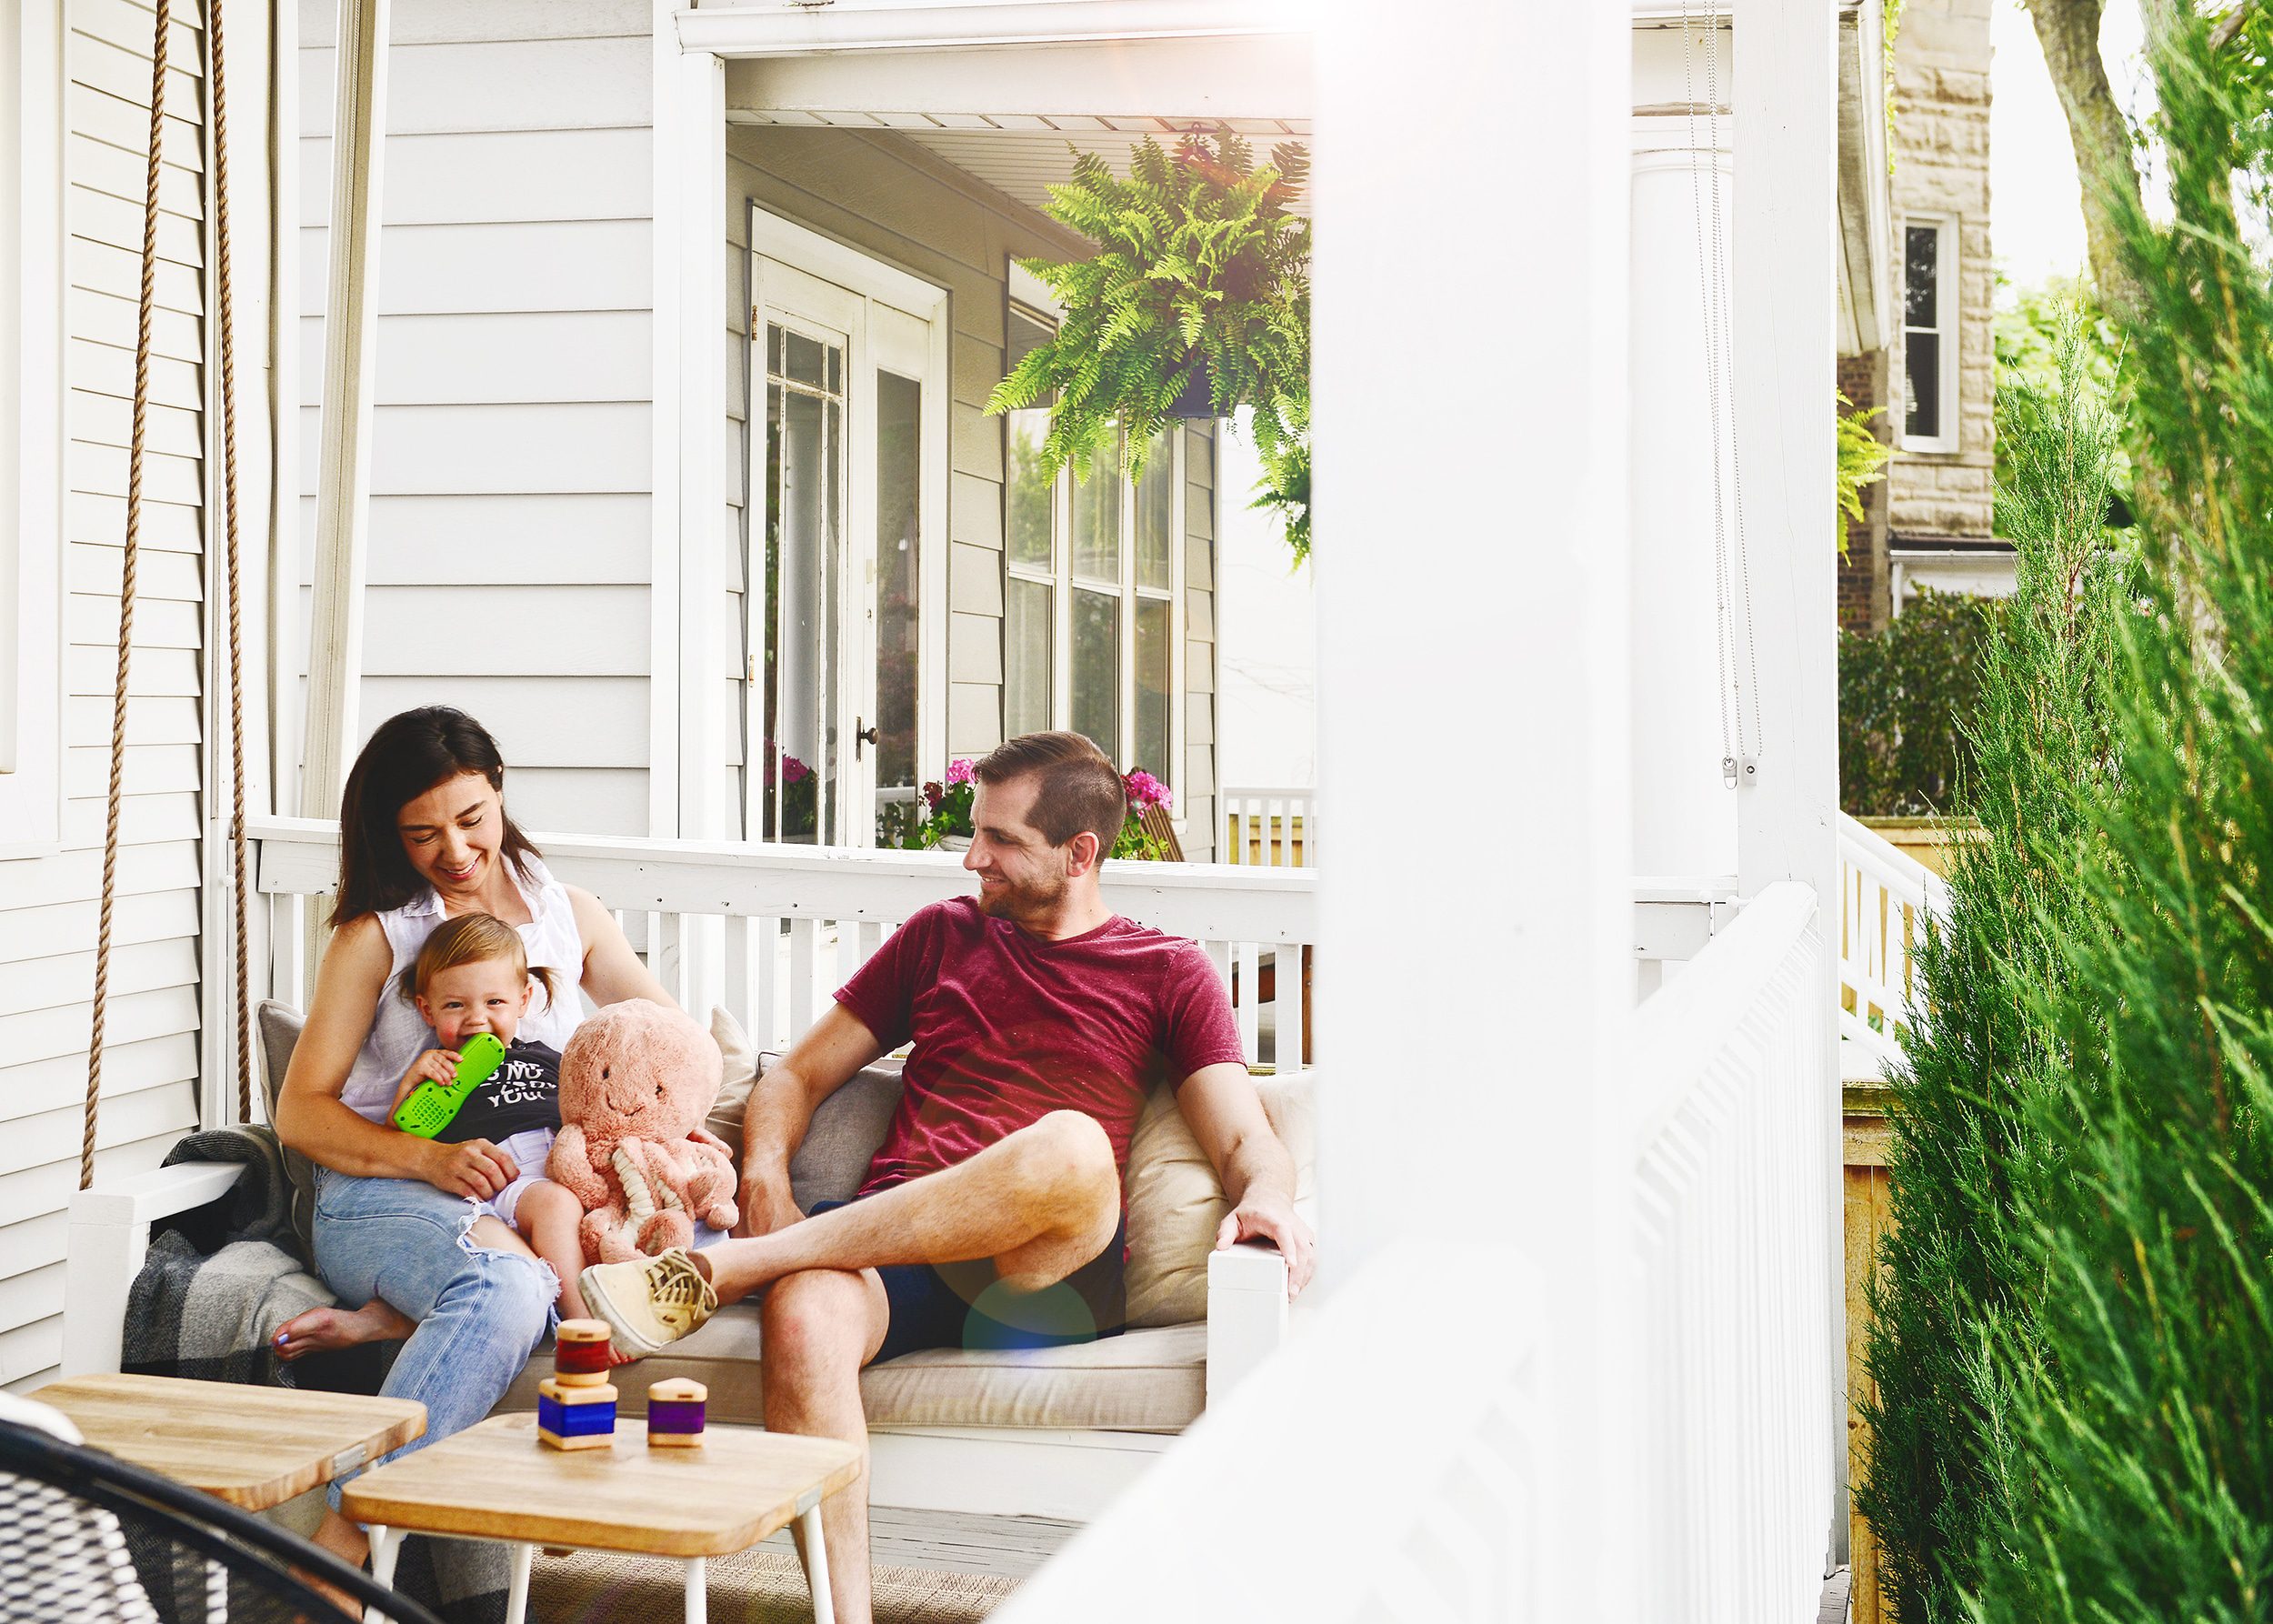 Term Life Insurance for the Ones You Love // via Yellow Brick Home